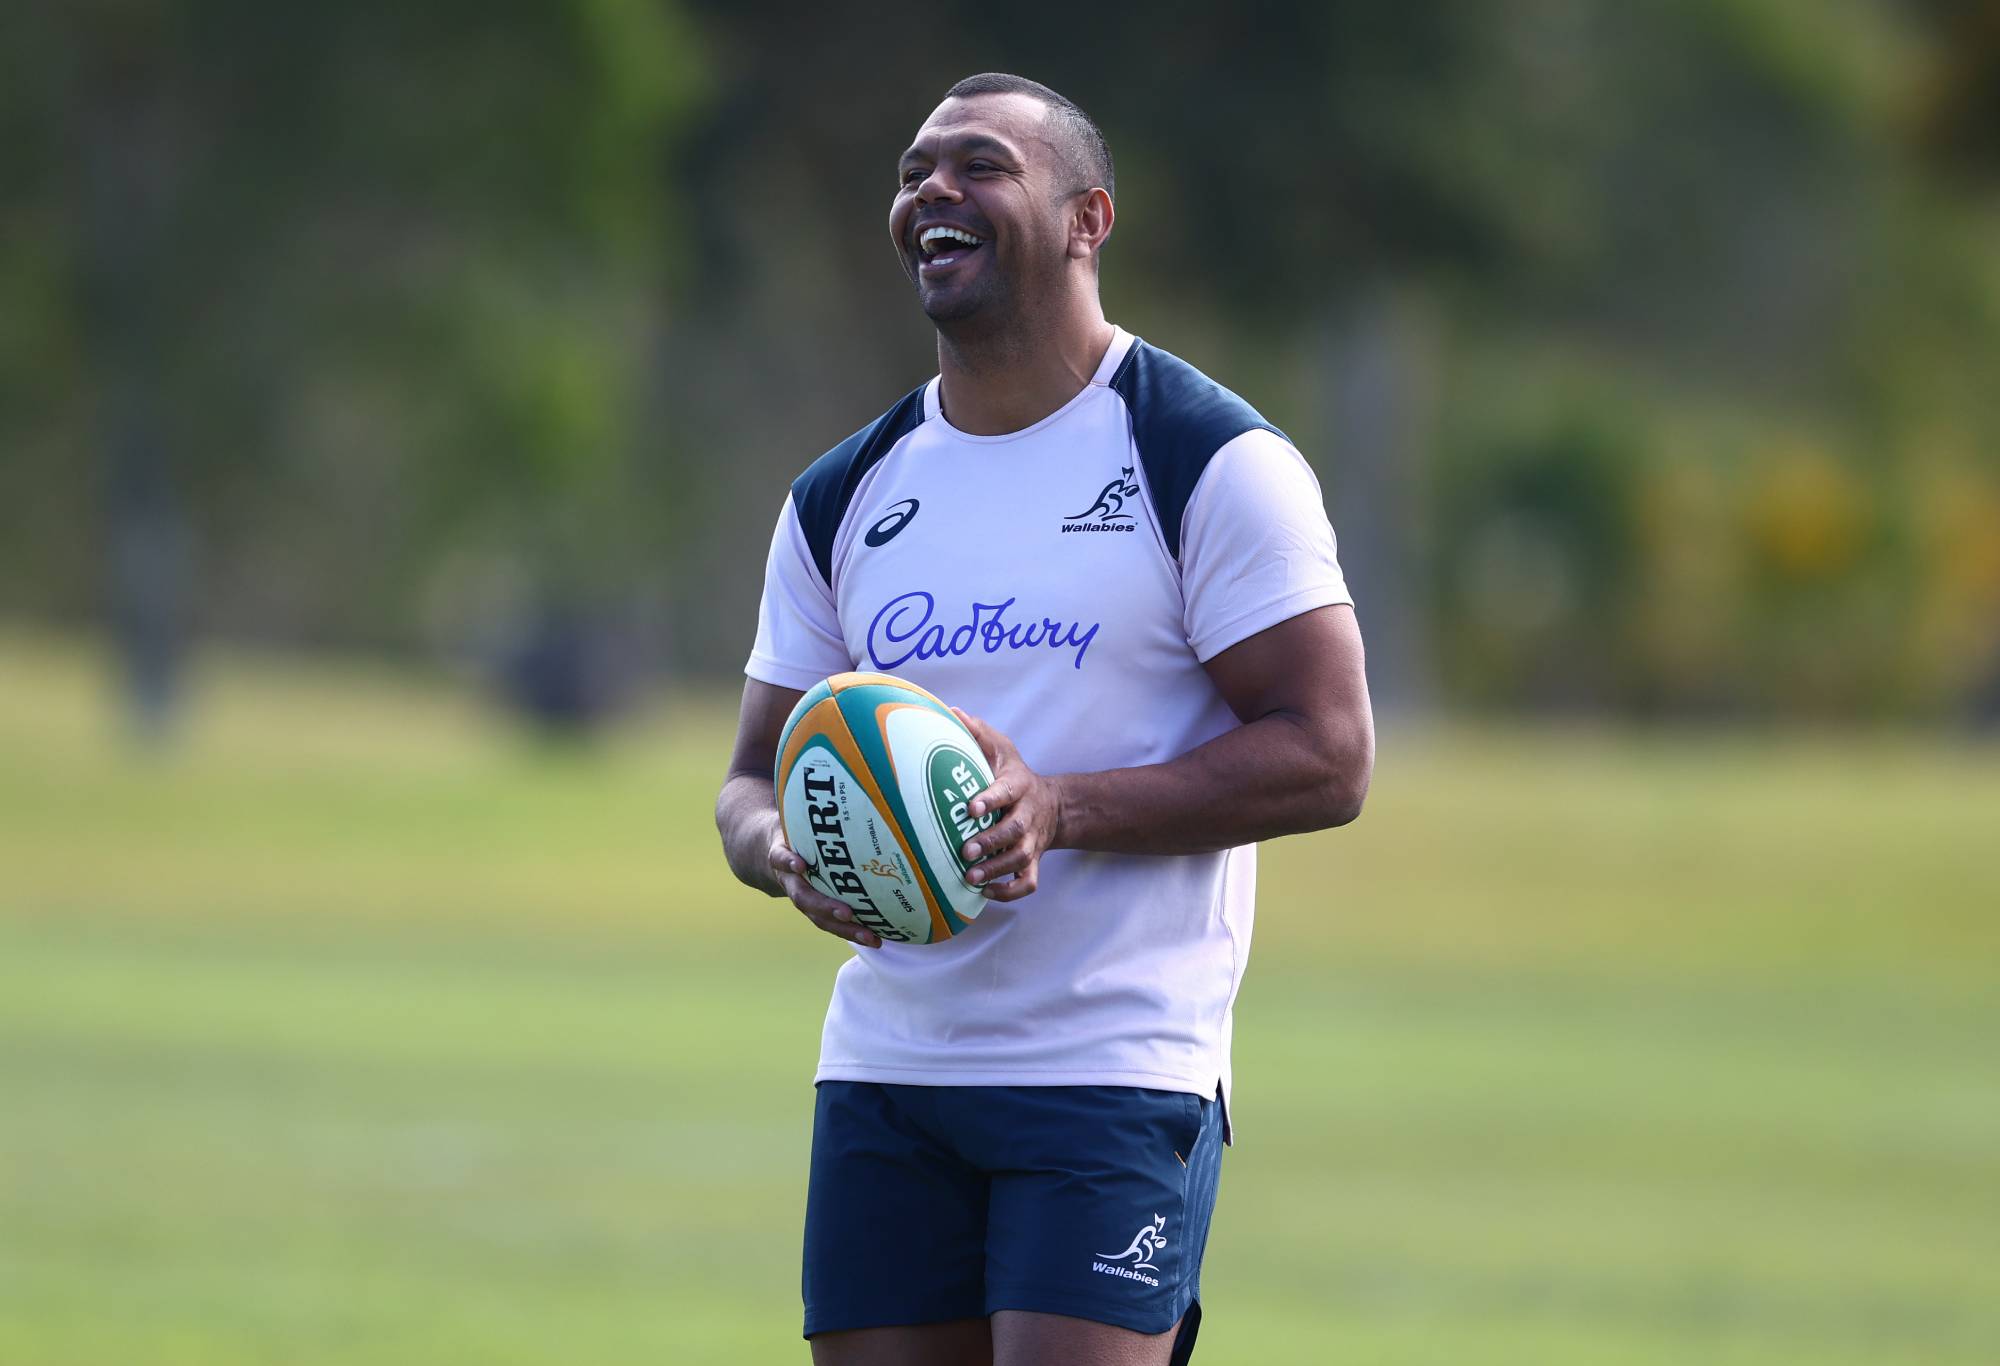 Kurtley Beale during an Australia Wallabies training session at Sanctuary Cove on August 23, 2022 in Gold Coast, Australia. (Photo by Chris Hyde/Getty Images)